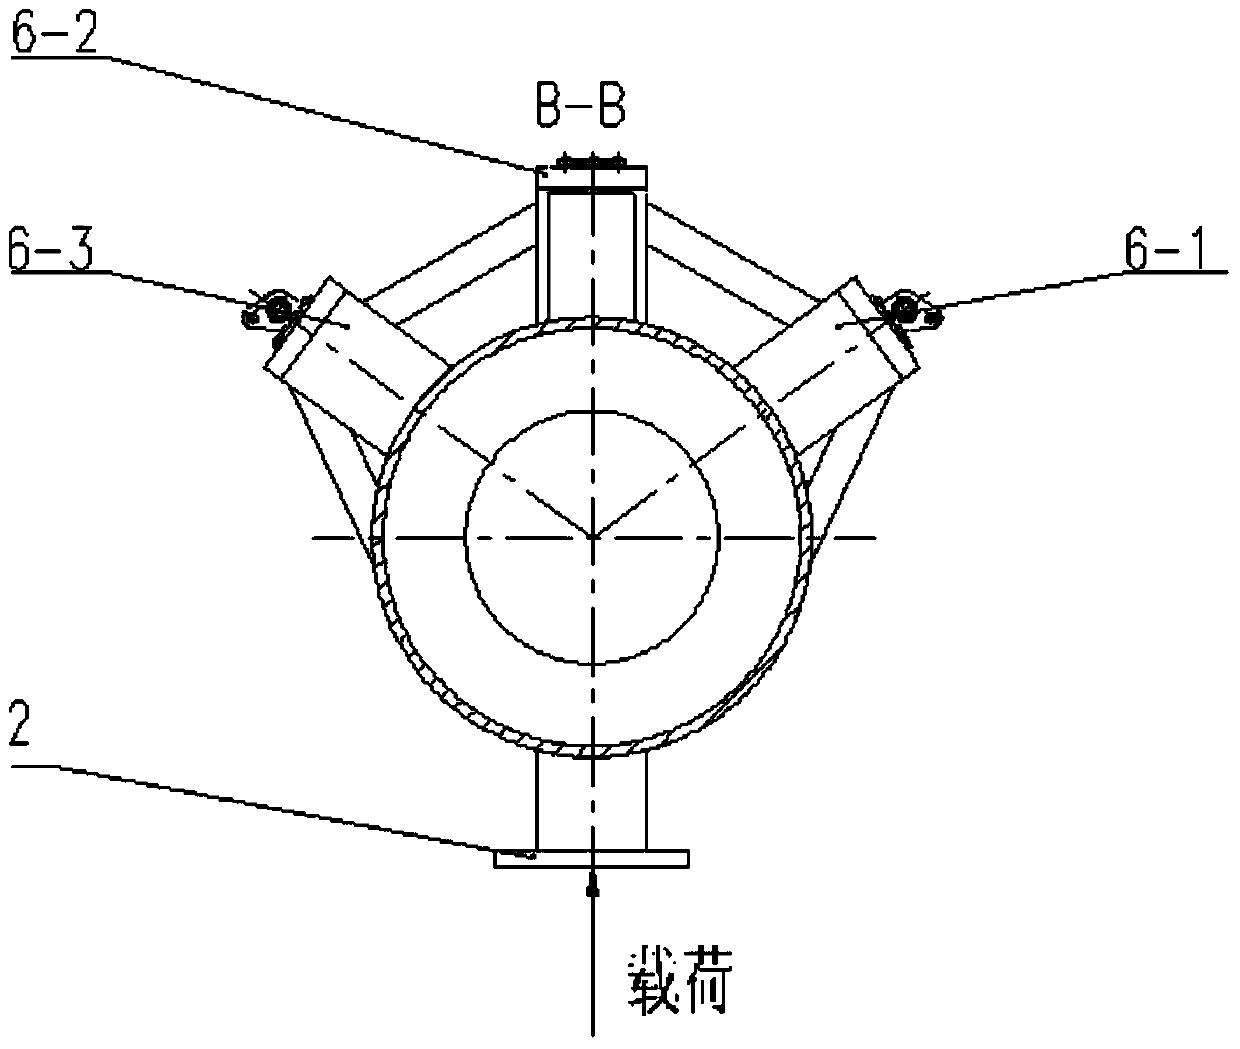 Motor substitution equipment for static force test of airplane wing